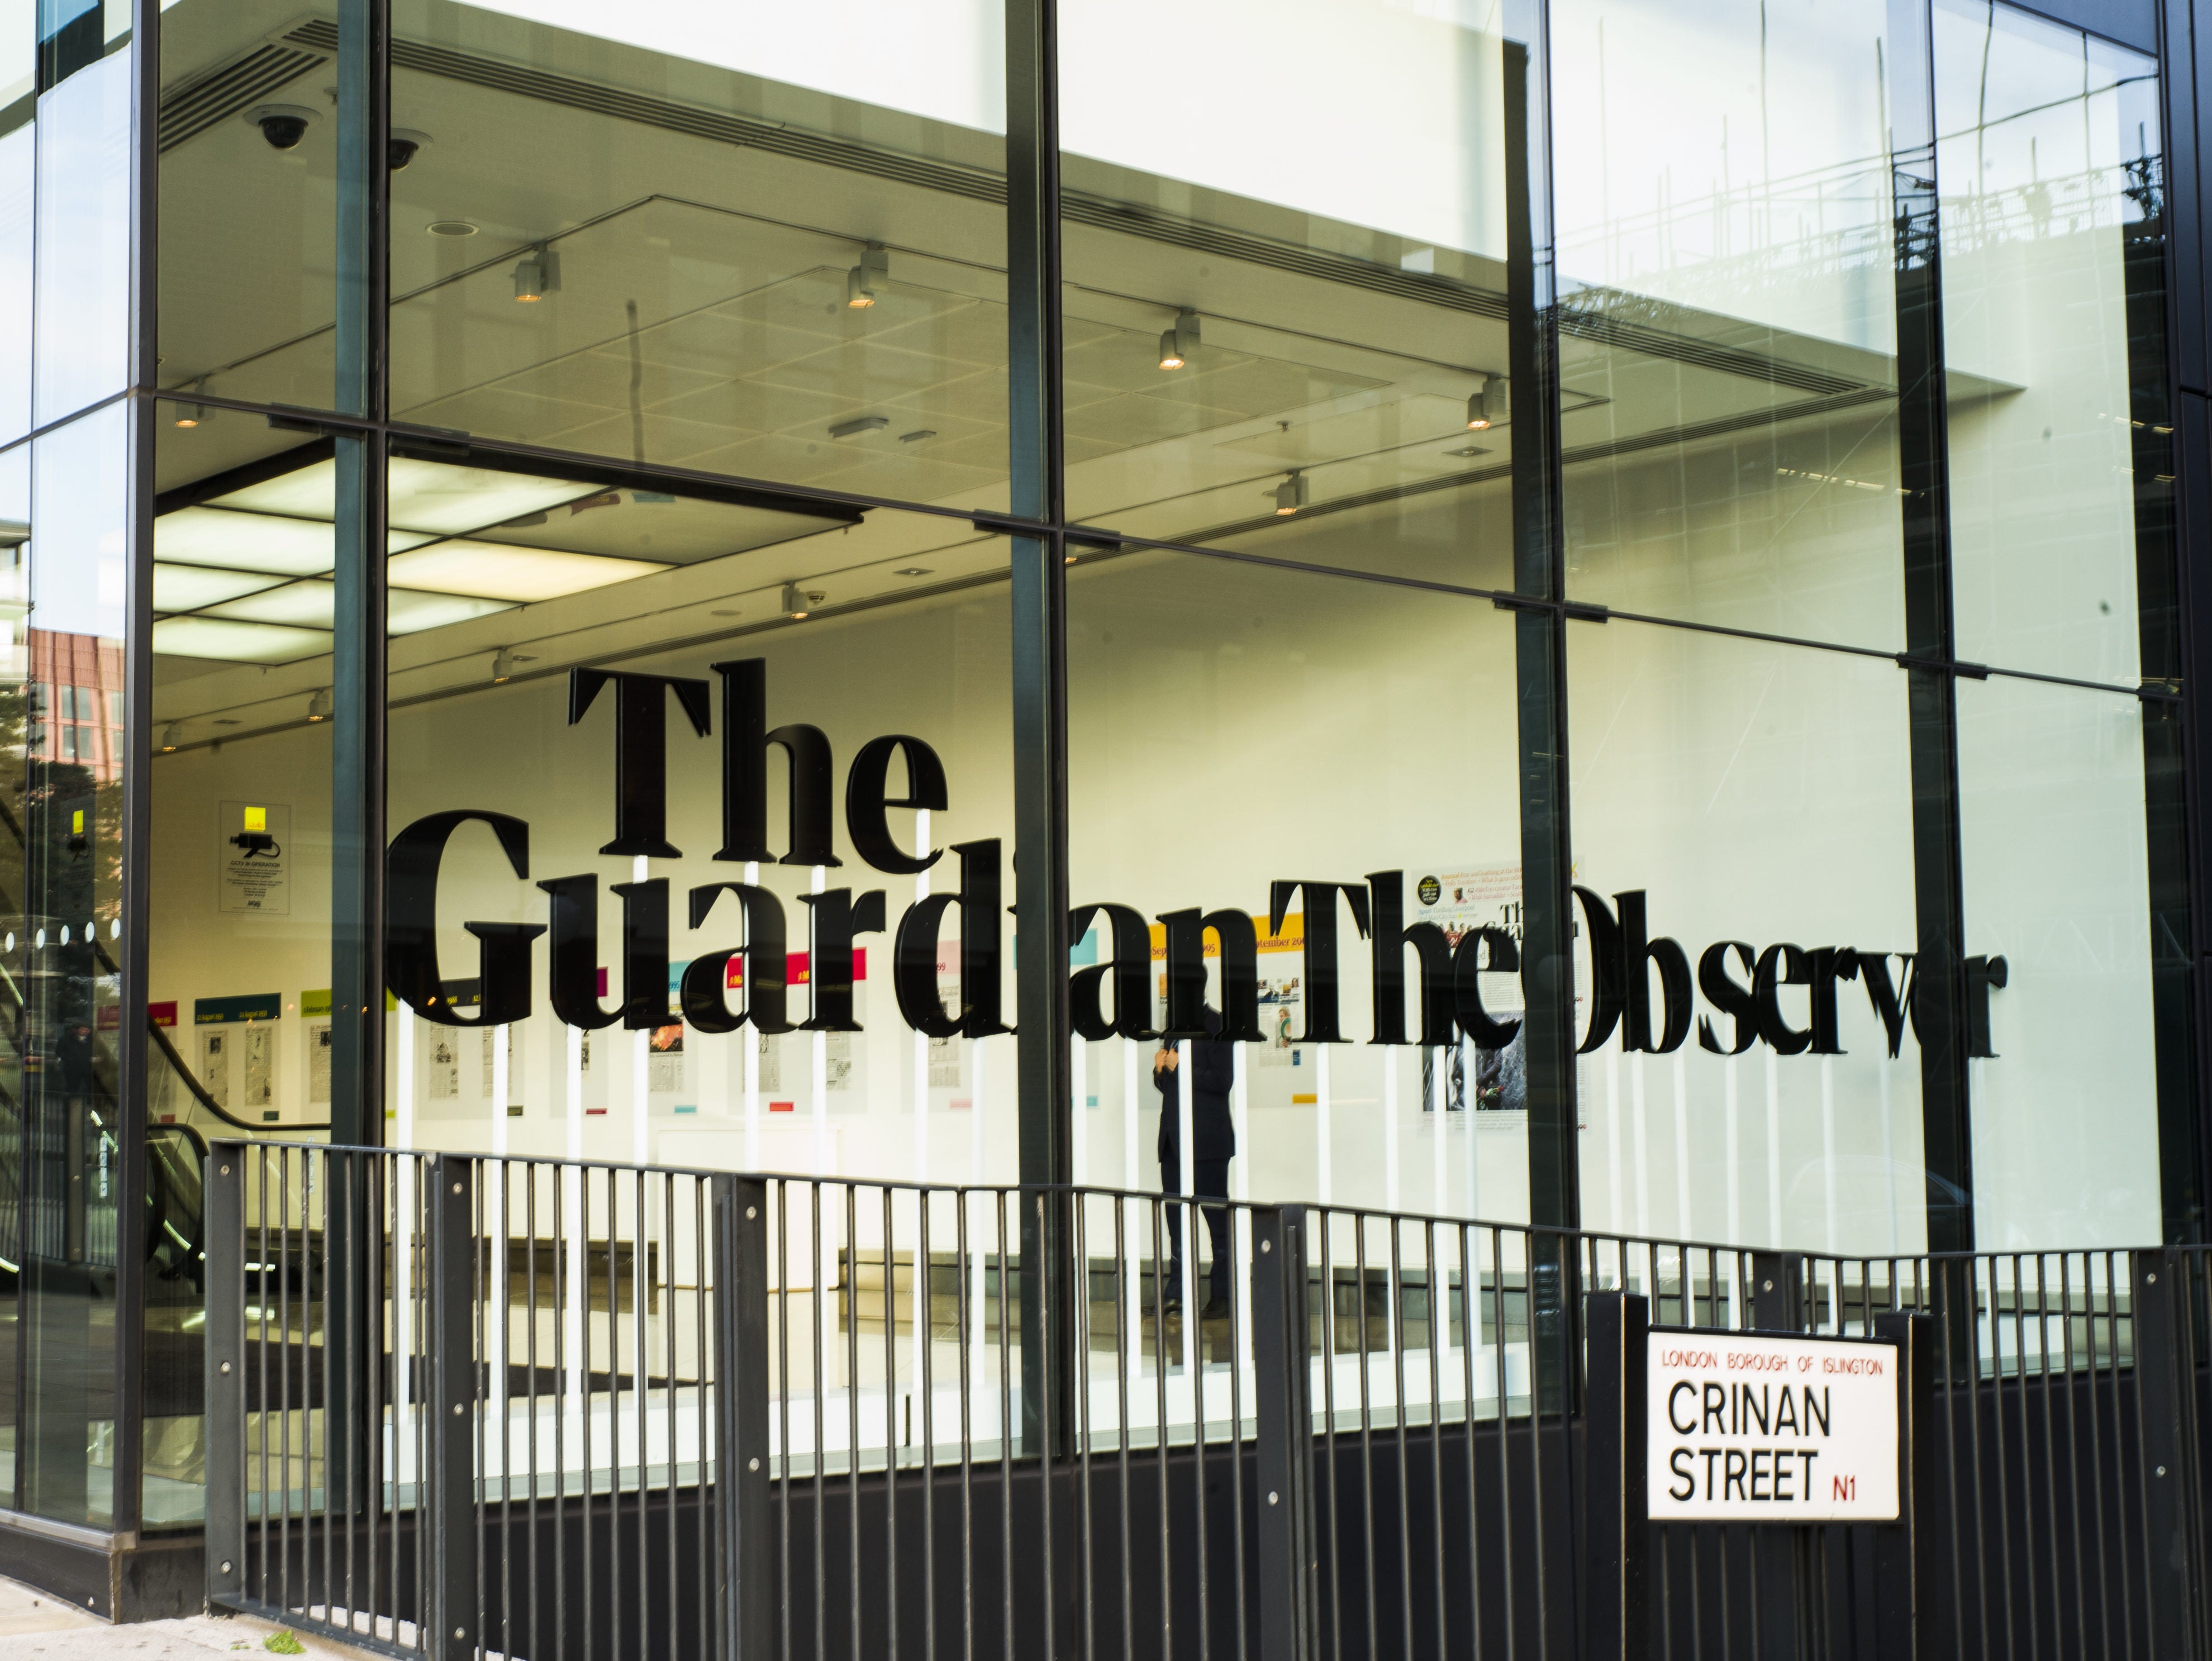 The Guardian hits 1m paying digital readers, including 500,000 outside the UK